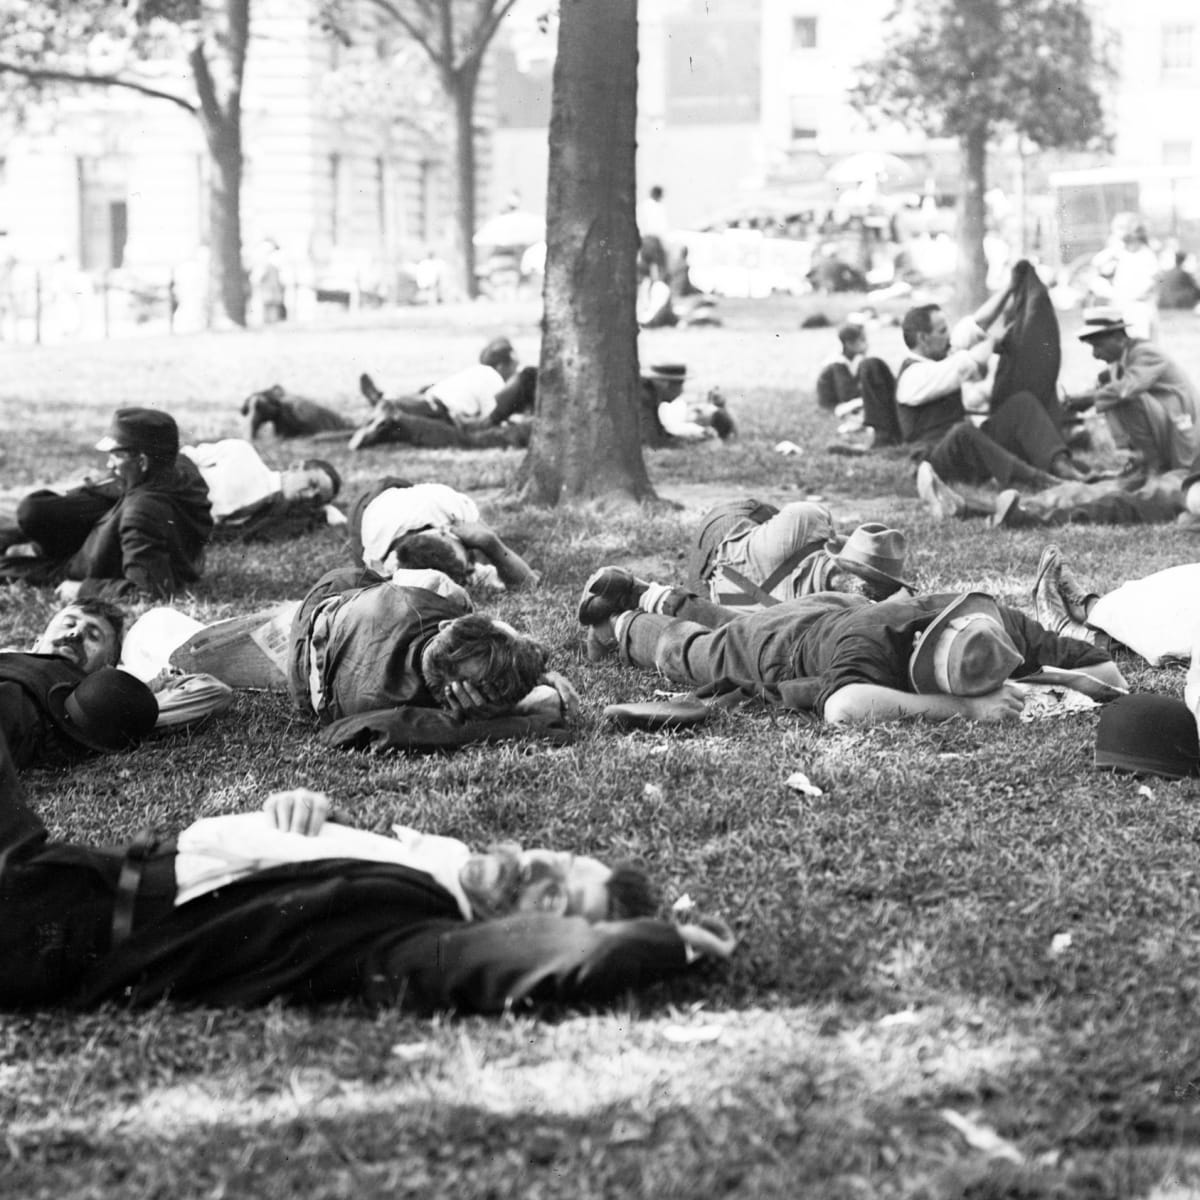 The Killer 1911 Heat Wave That Drove People Insane - HISTORY